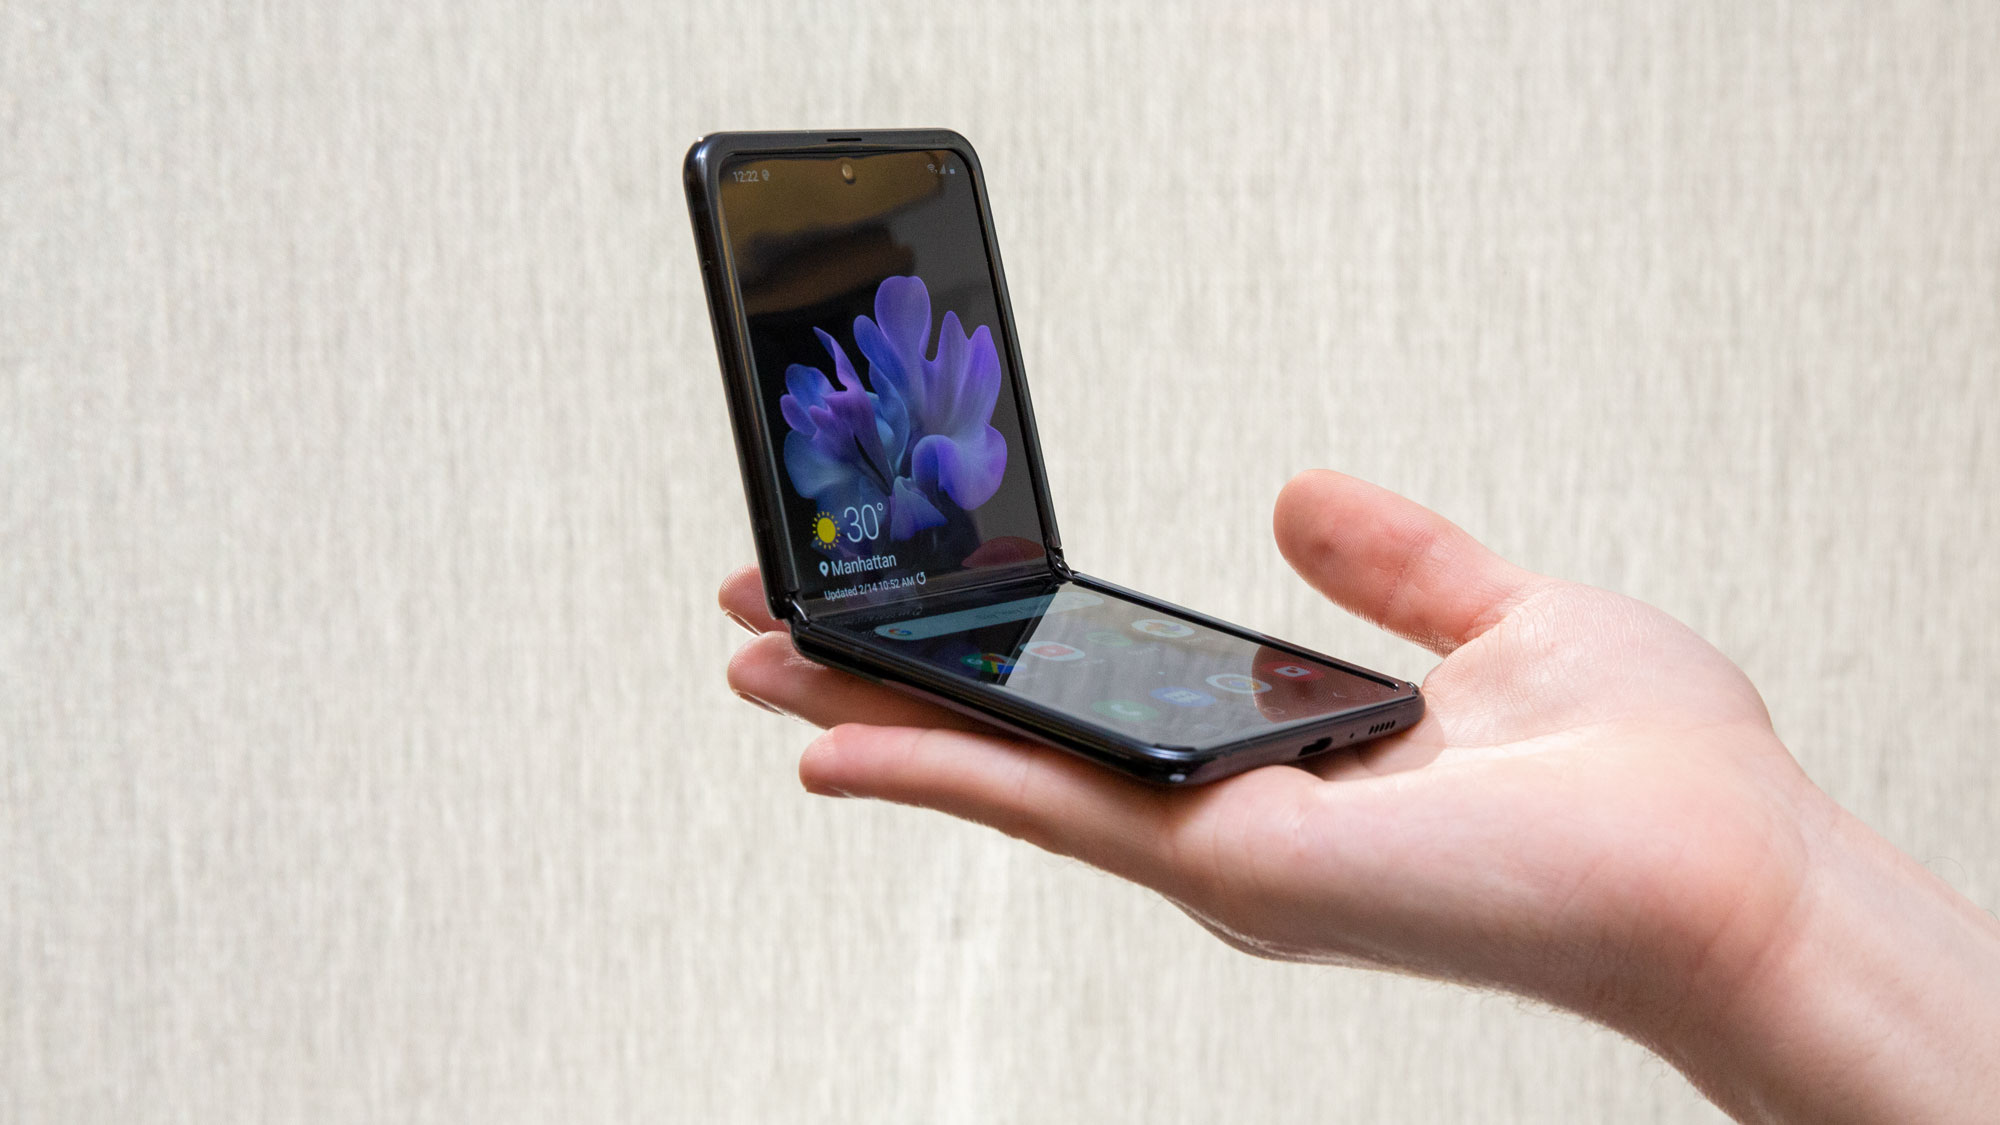 Samsung Foldable Phone: News, Rumors, Specs, And More